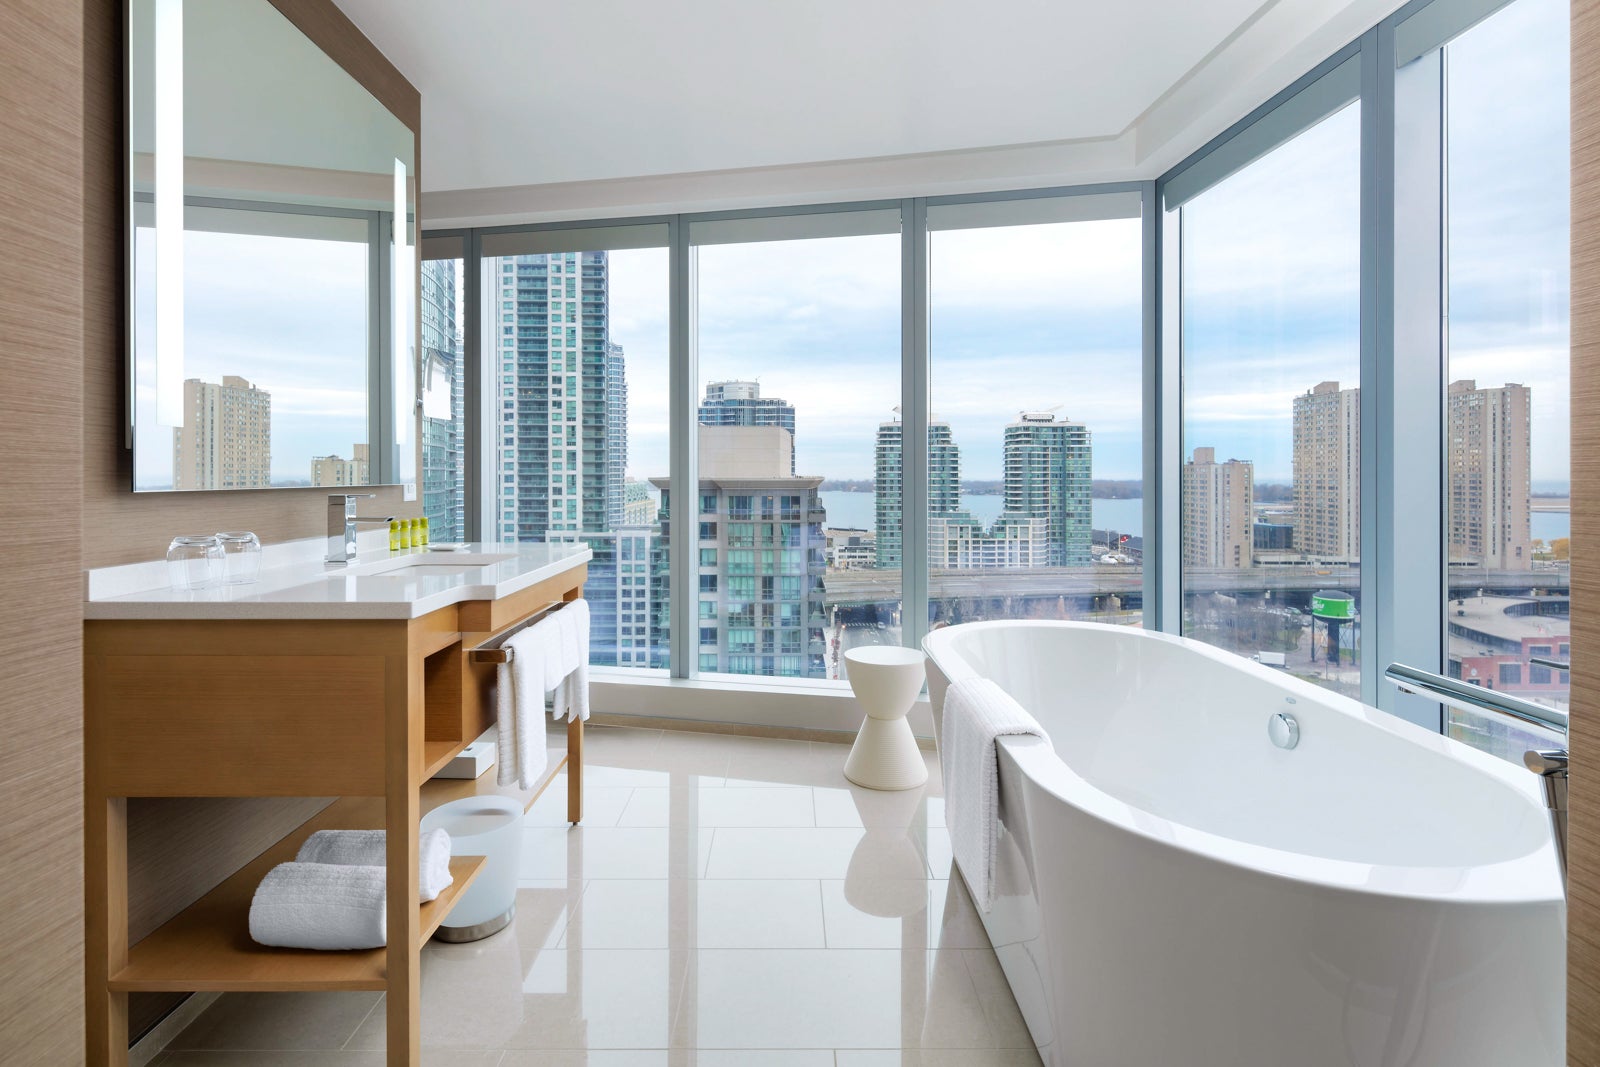 large bathtub in room with floor-to-ceiling windows